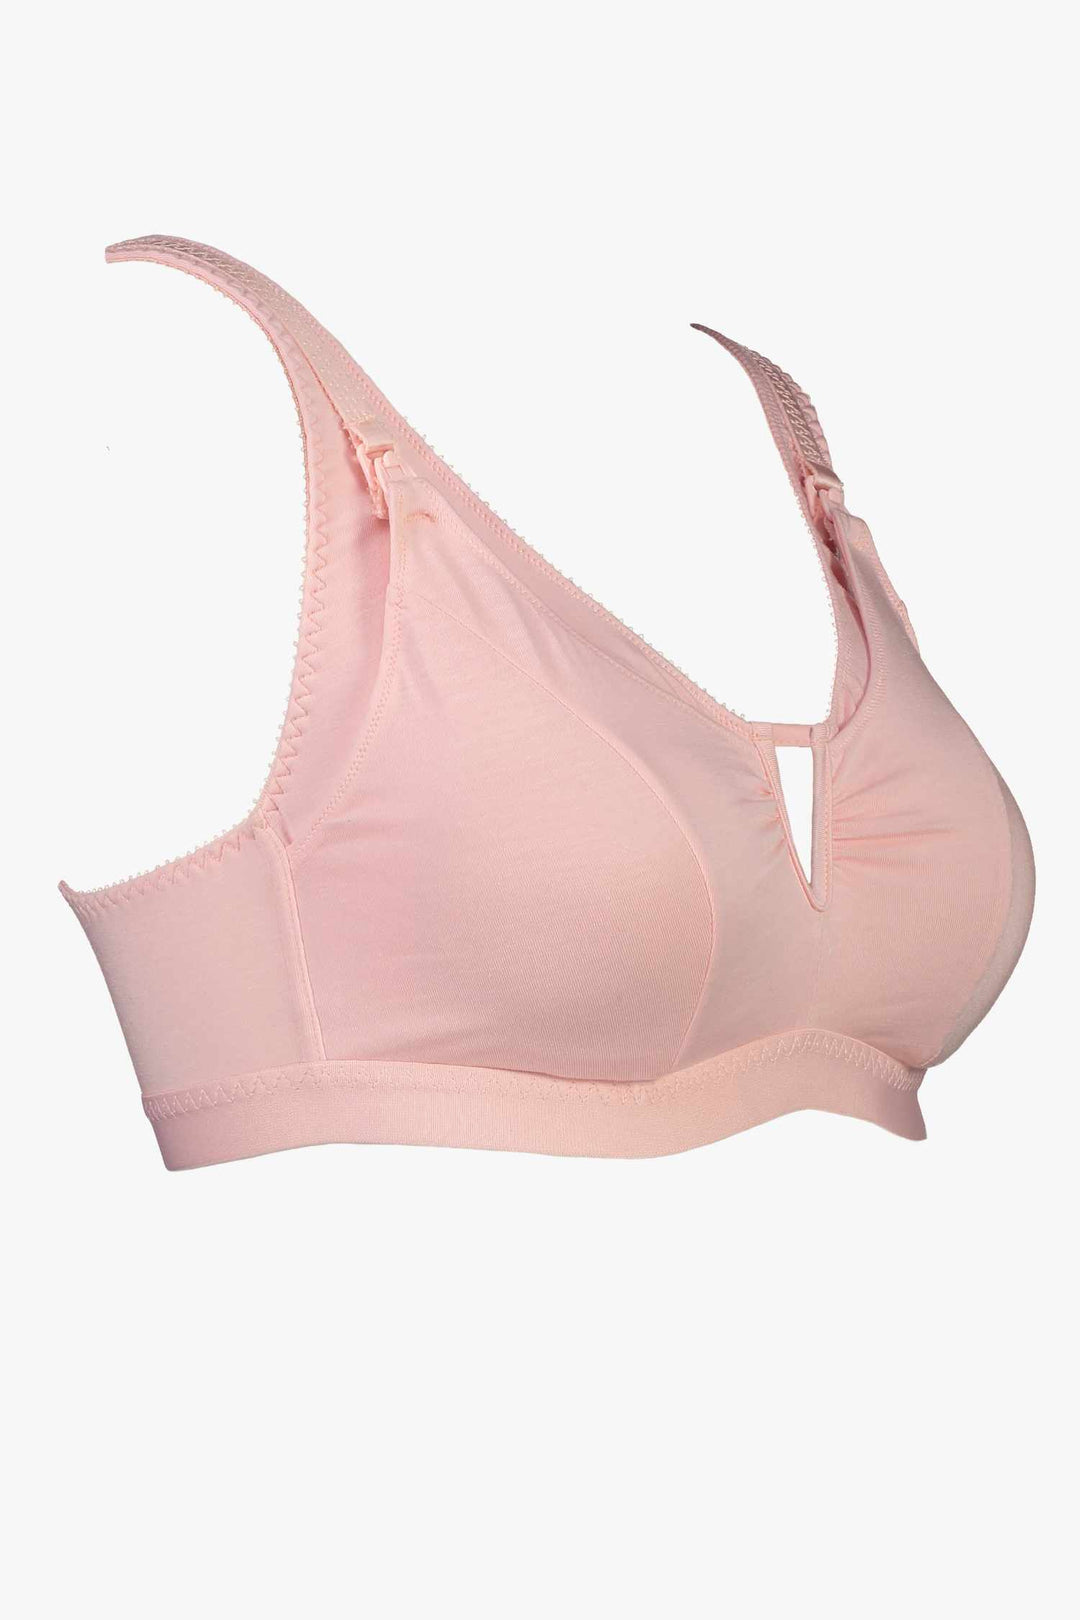 Videris Lingerie Belle nursing bra with adjustable straps and triple hook and eye closure in rosy pink